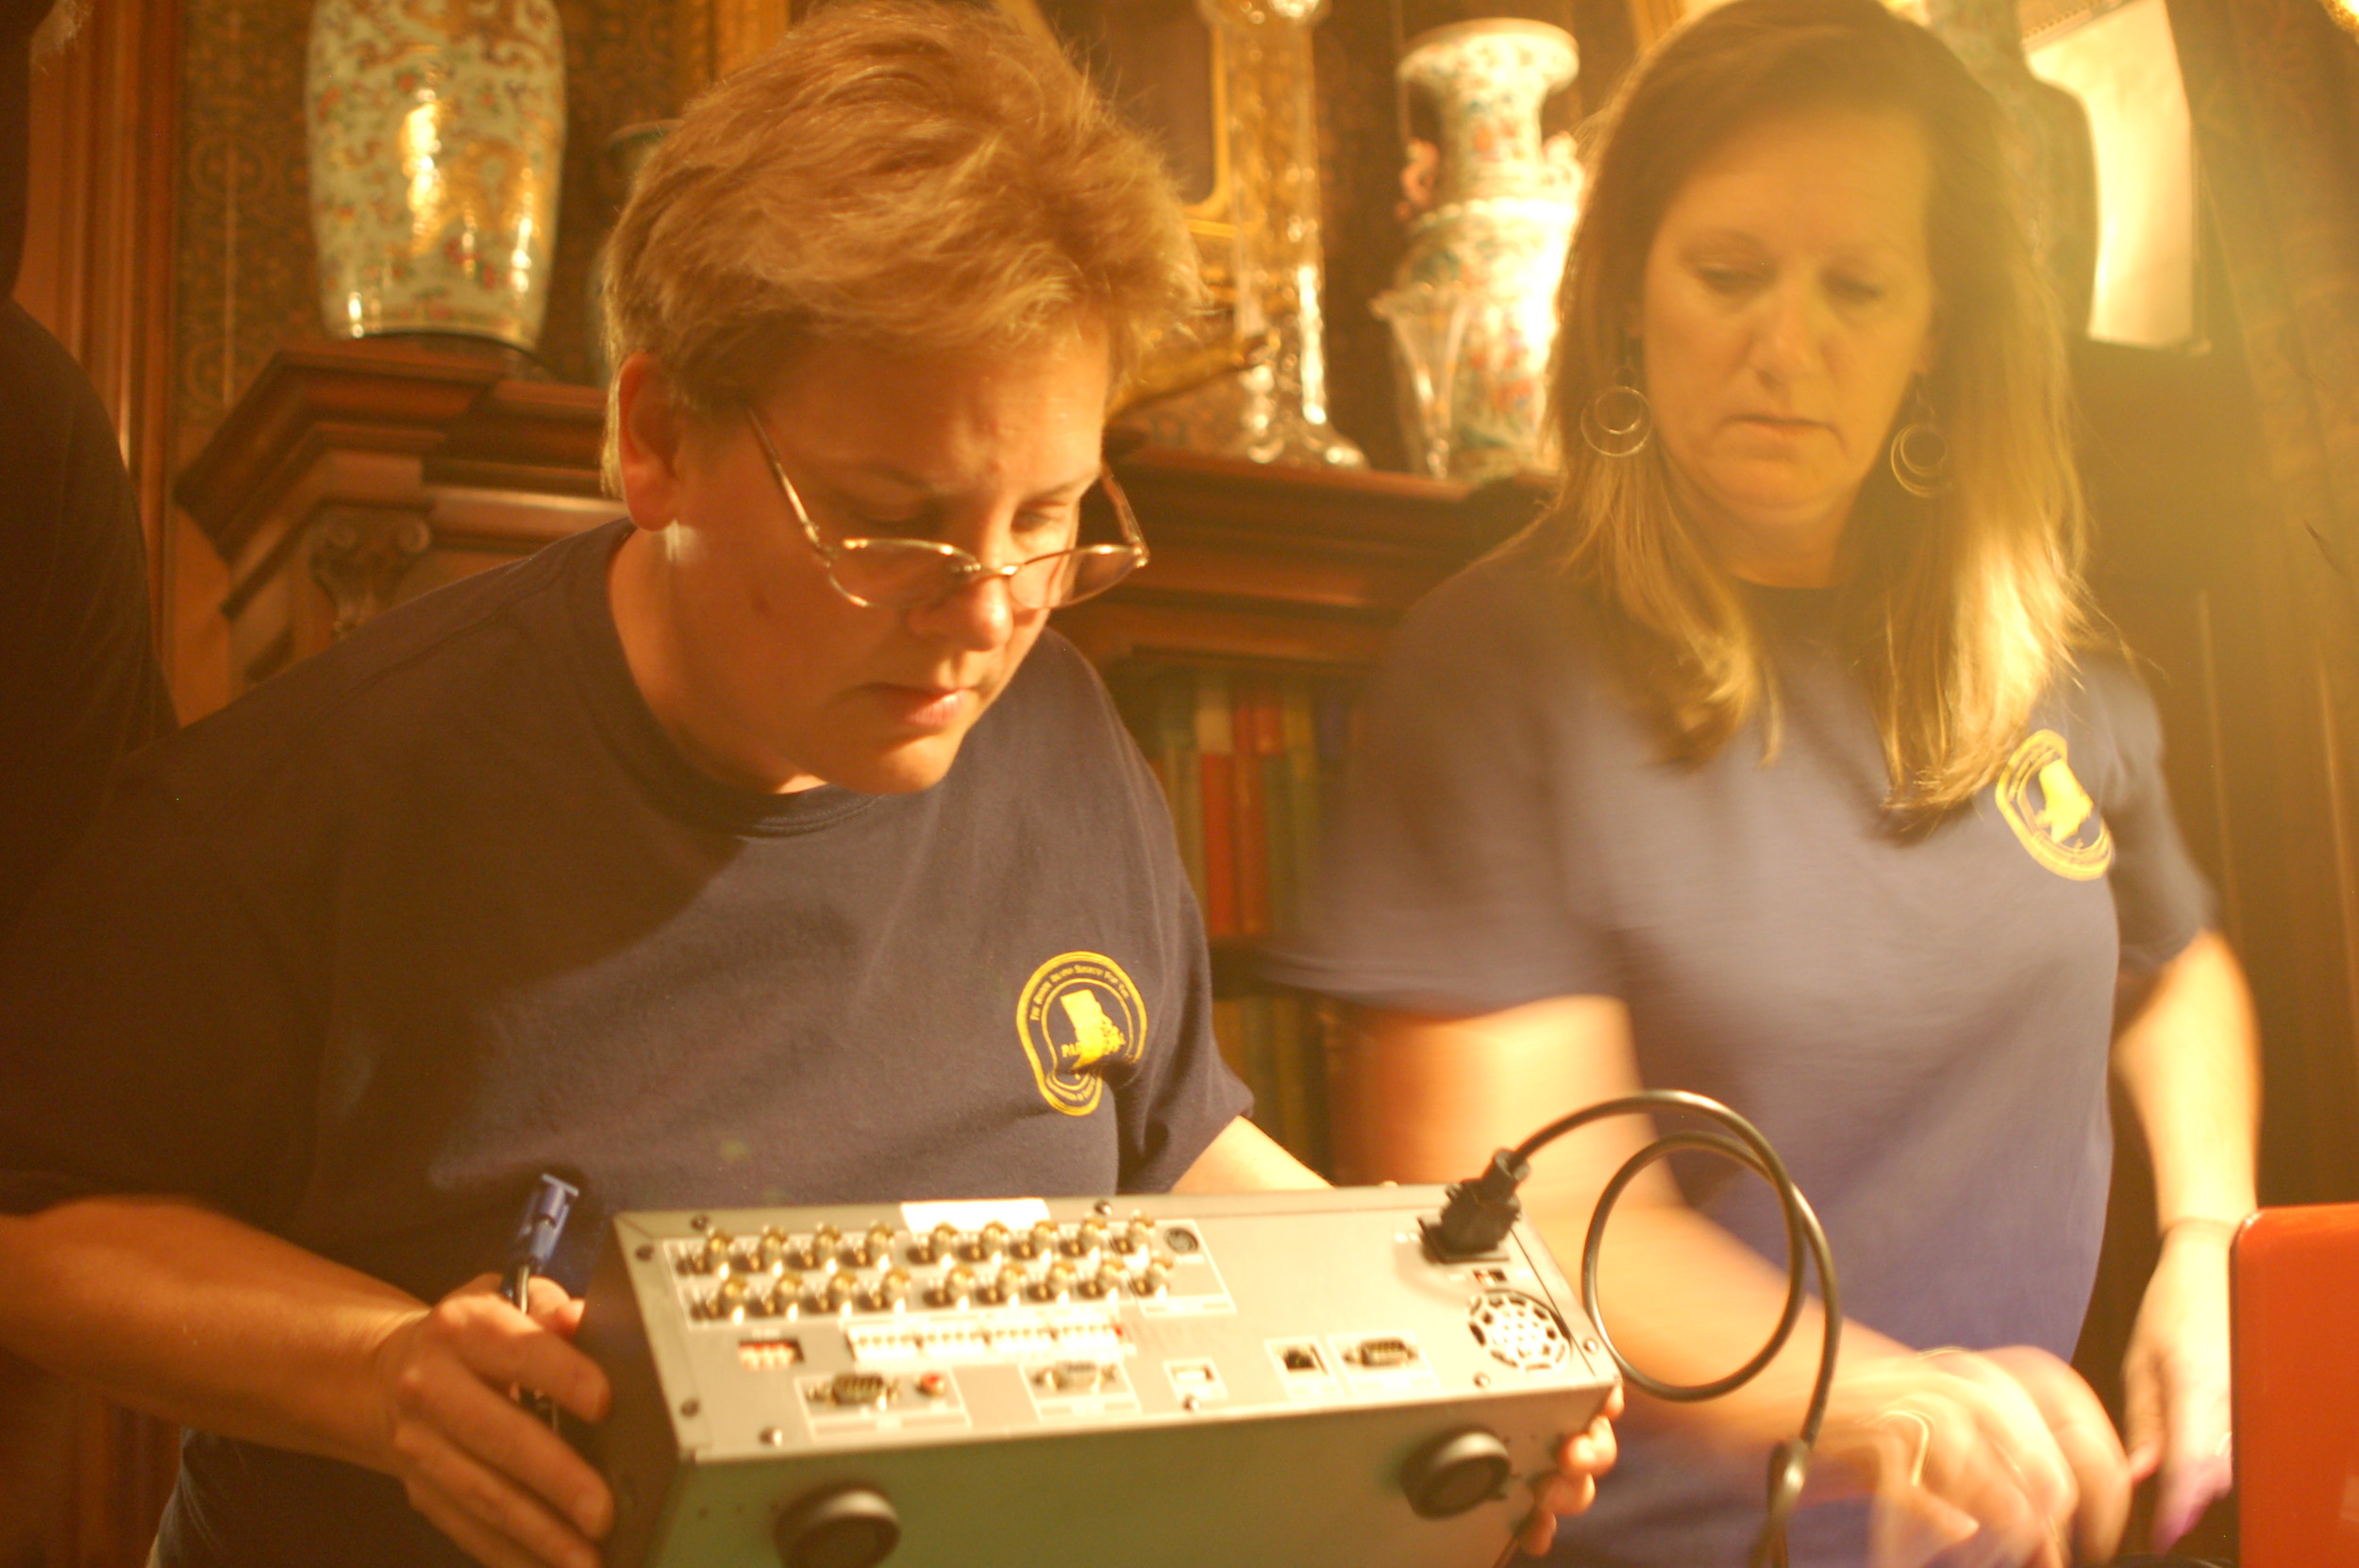 Julie DeMay hooks up the monitoring hardware while Wendy Thatcher looks on.